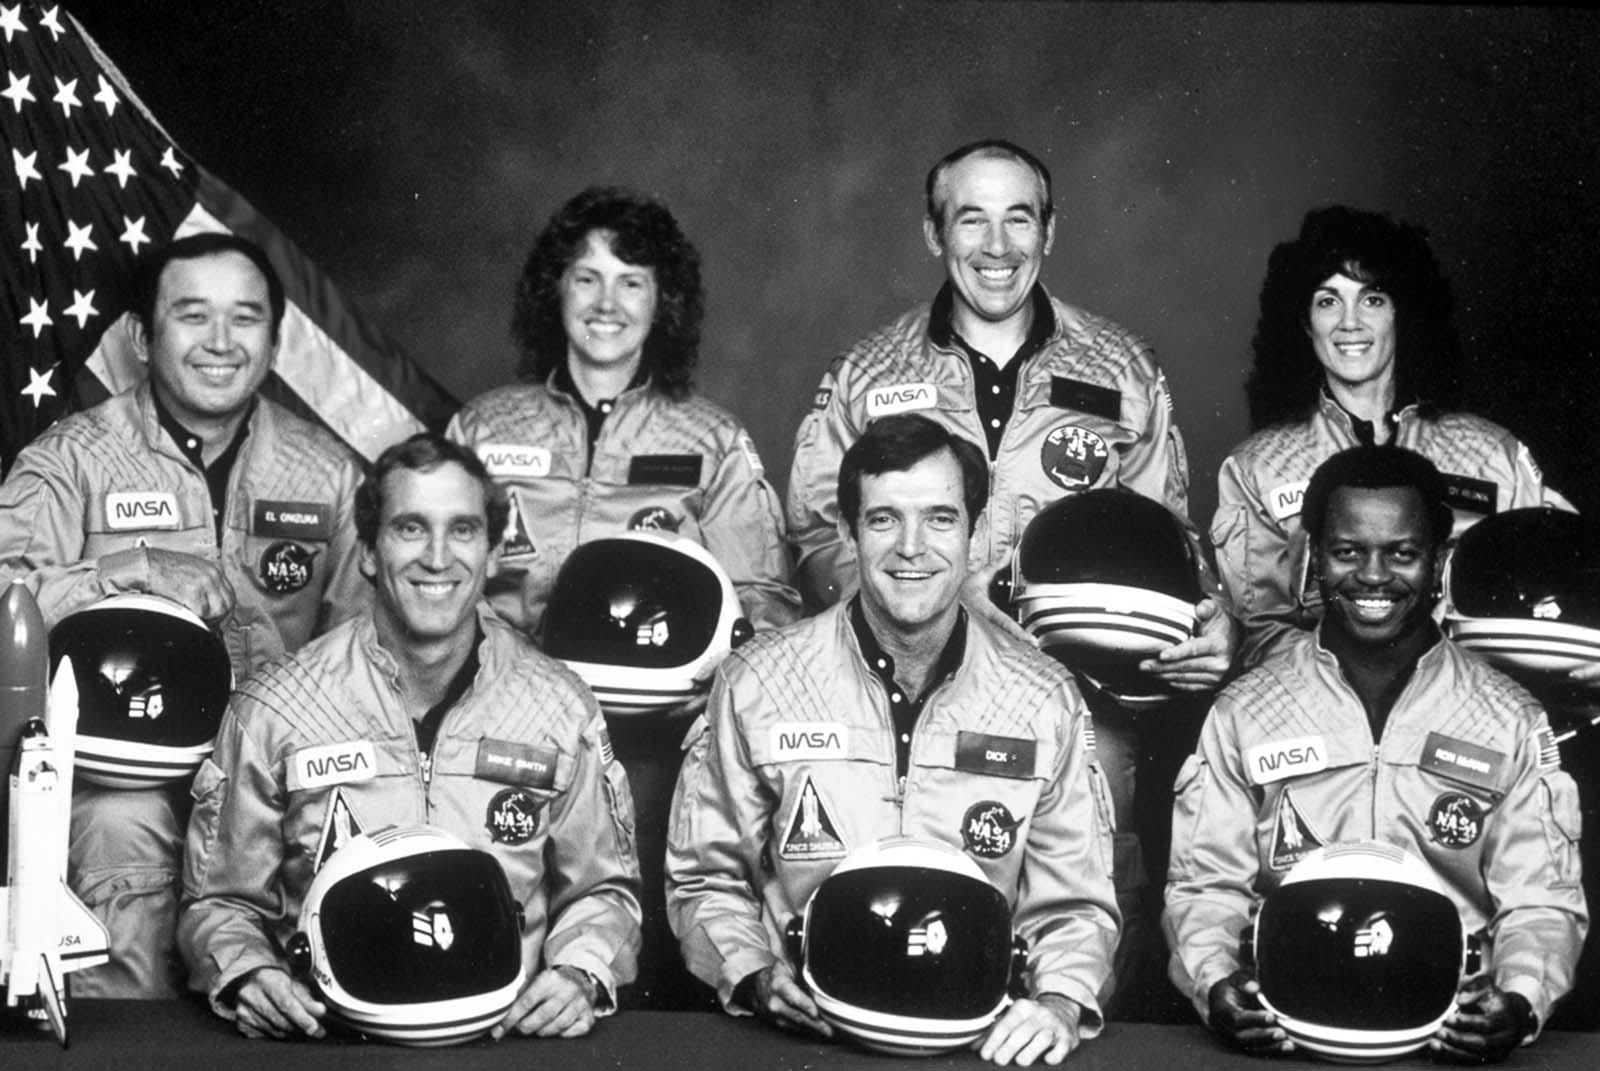 challenger disaster pictures